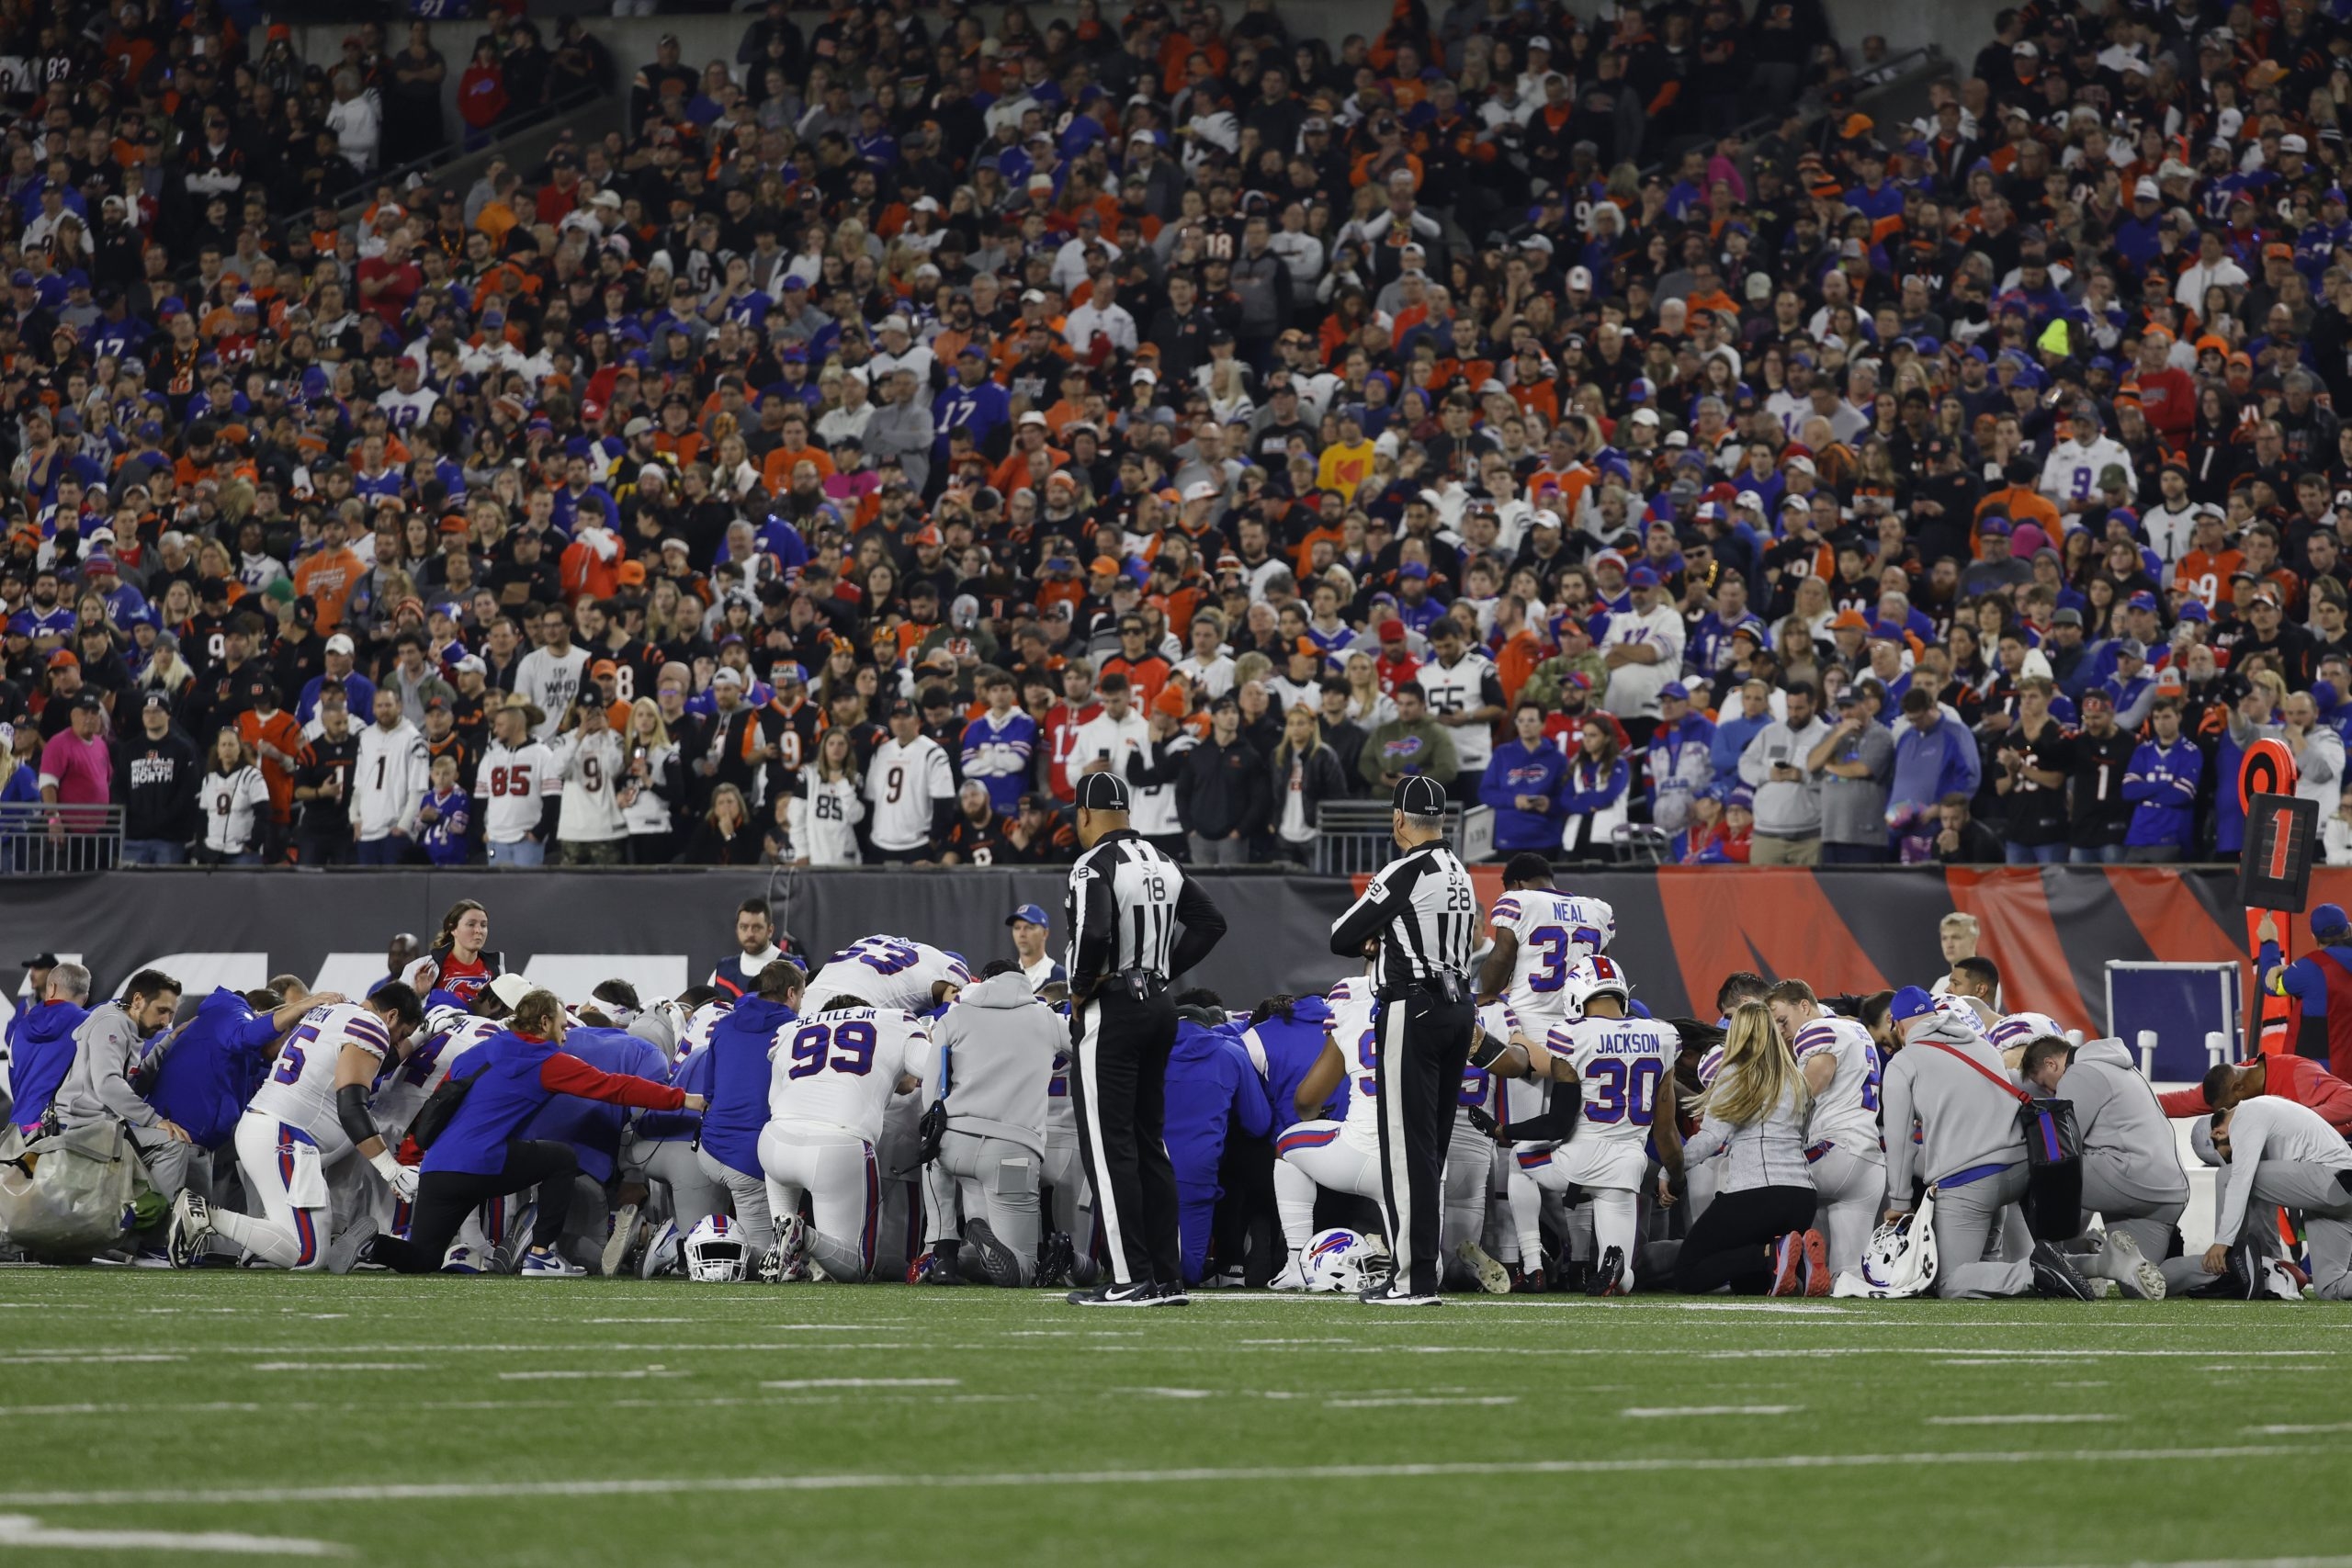 Damar Hamlin Collapsed on Field After Tackle, Got CPR, Suspended Game